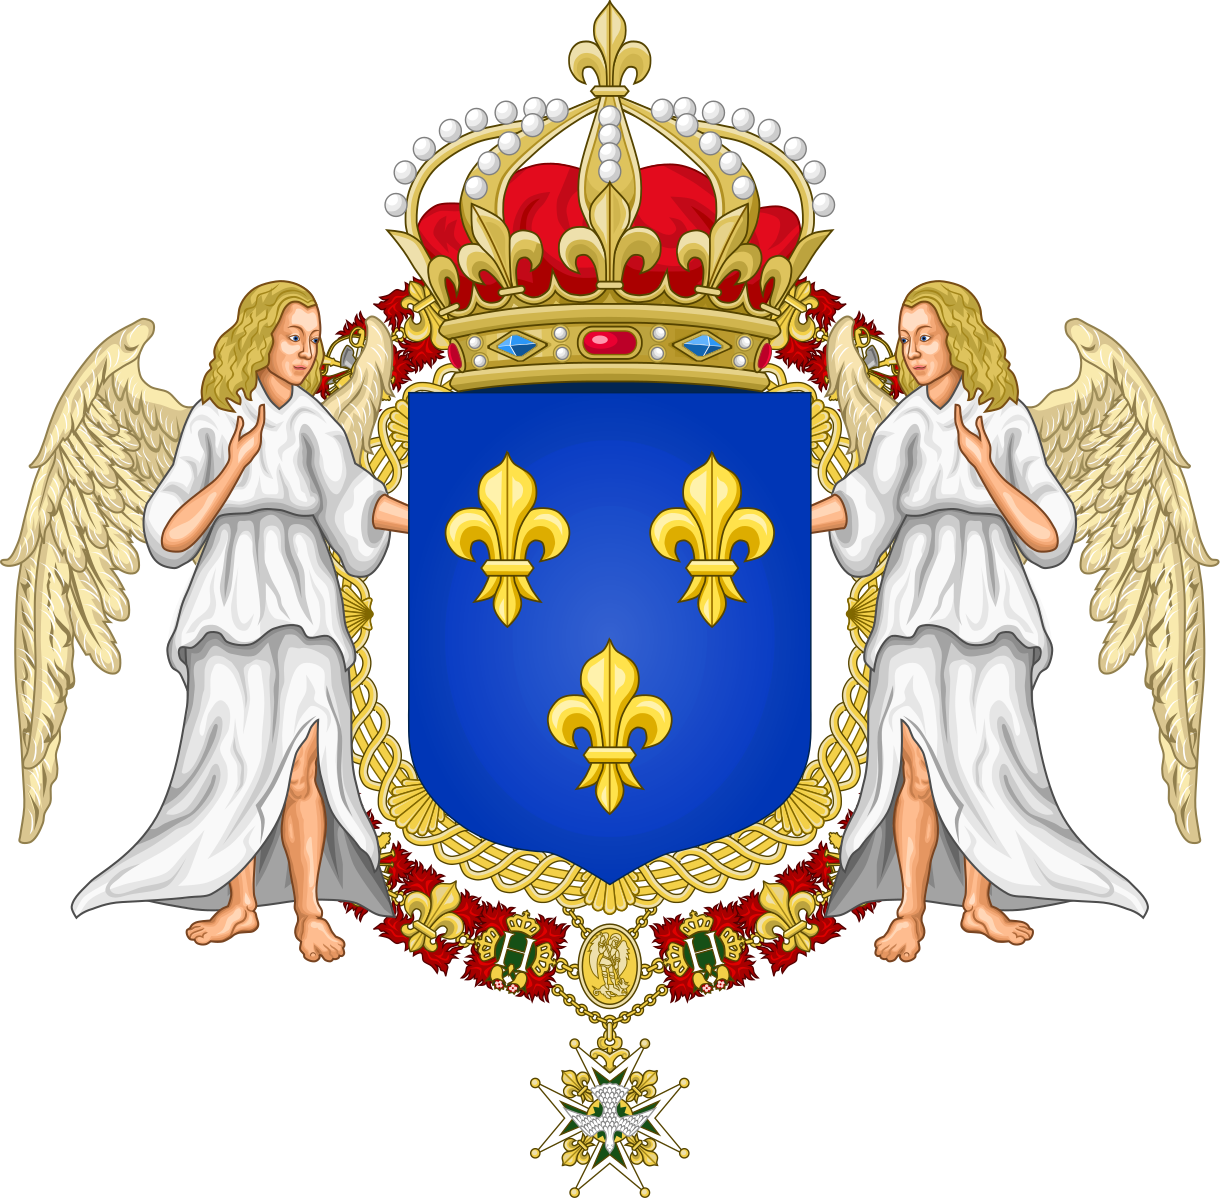 Coat-of-Arms of France